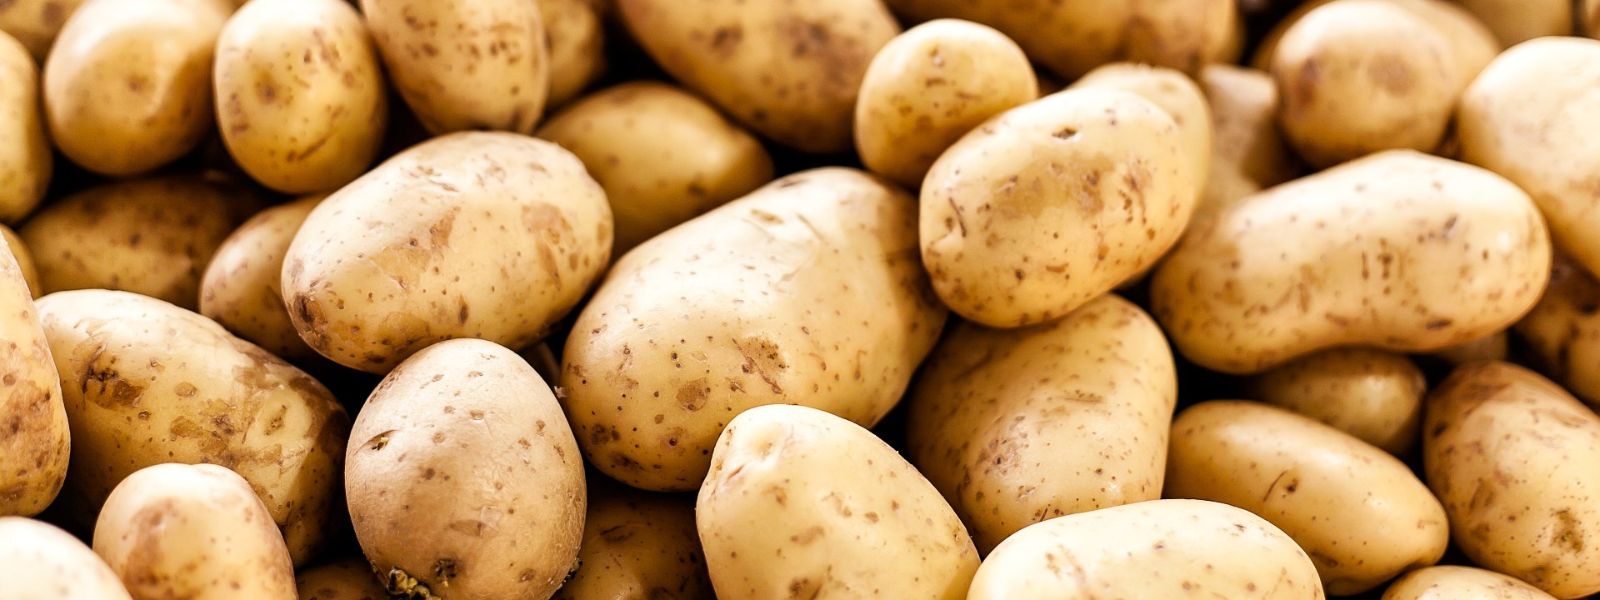 Special trade tax on imported potatoes extended